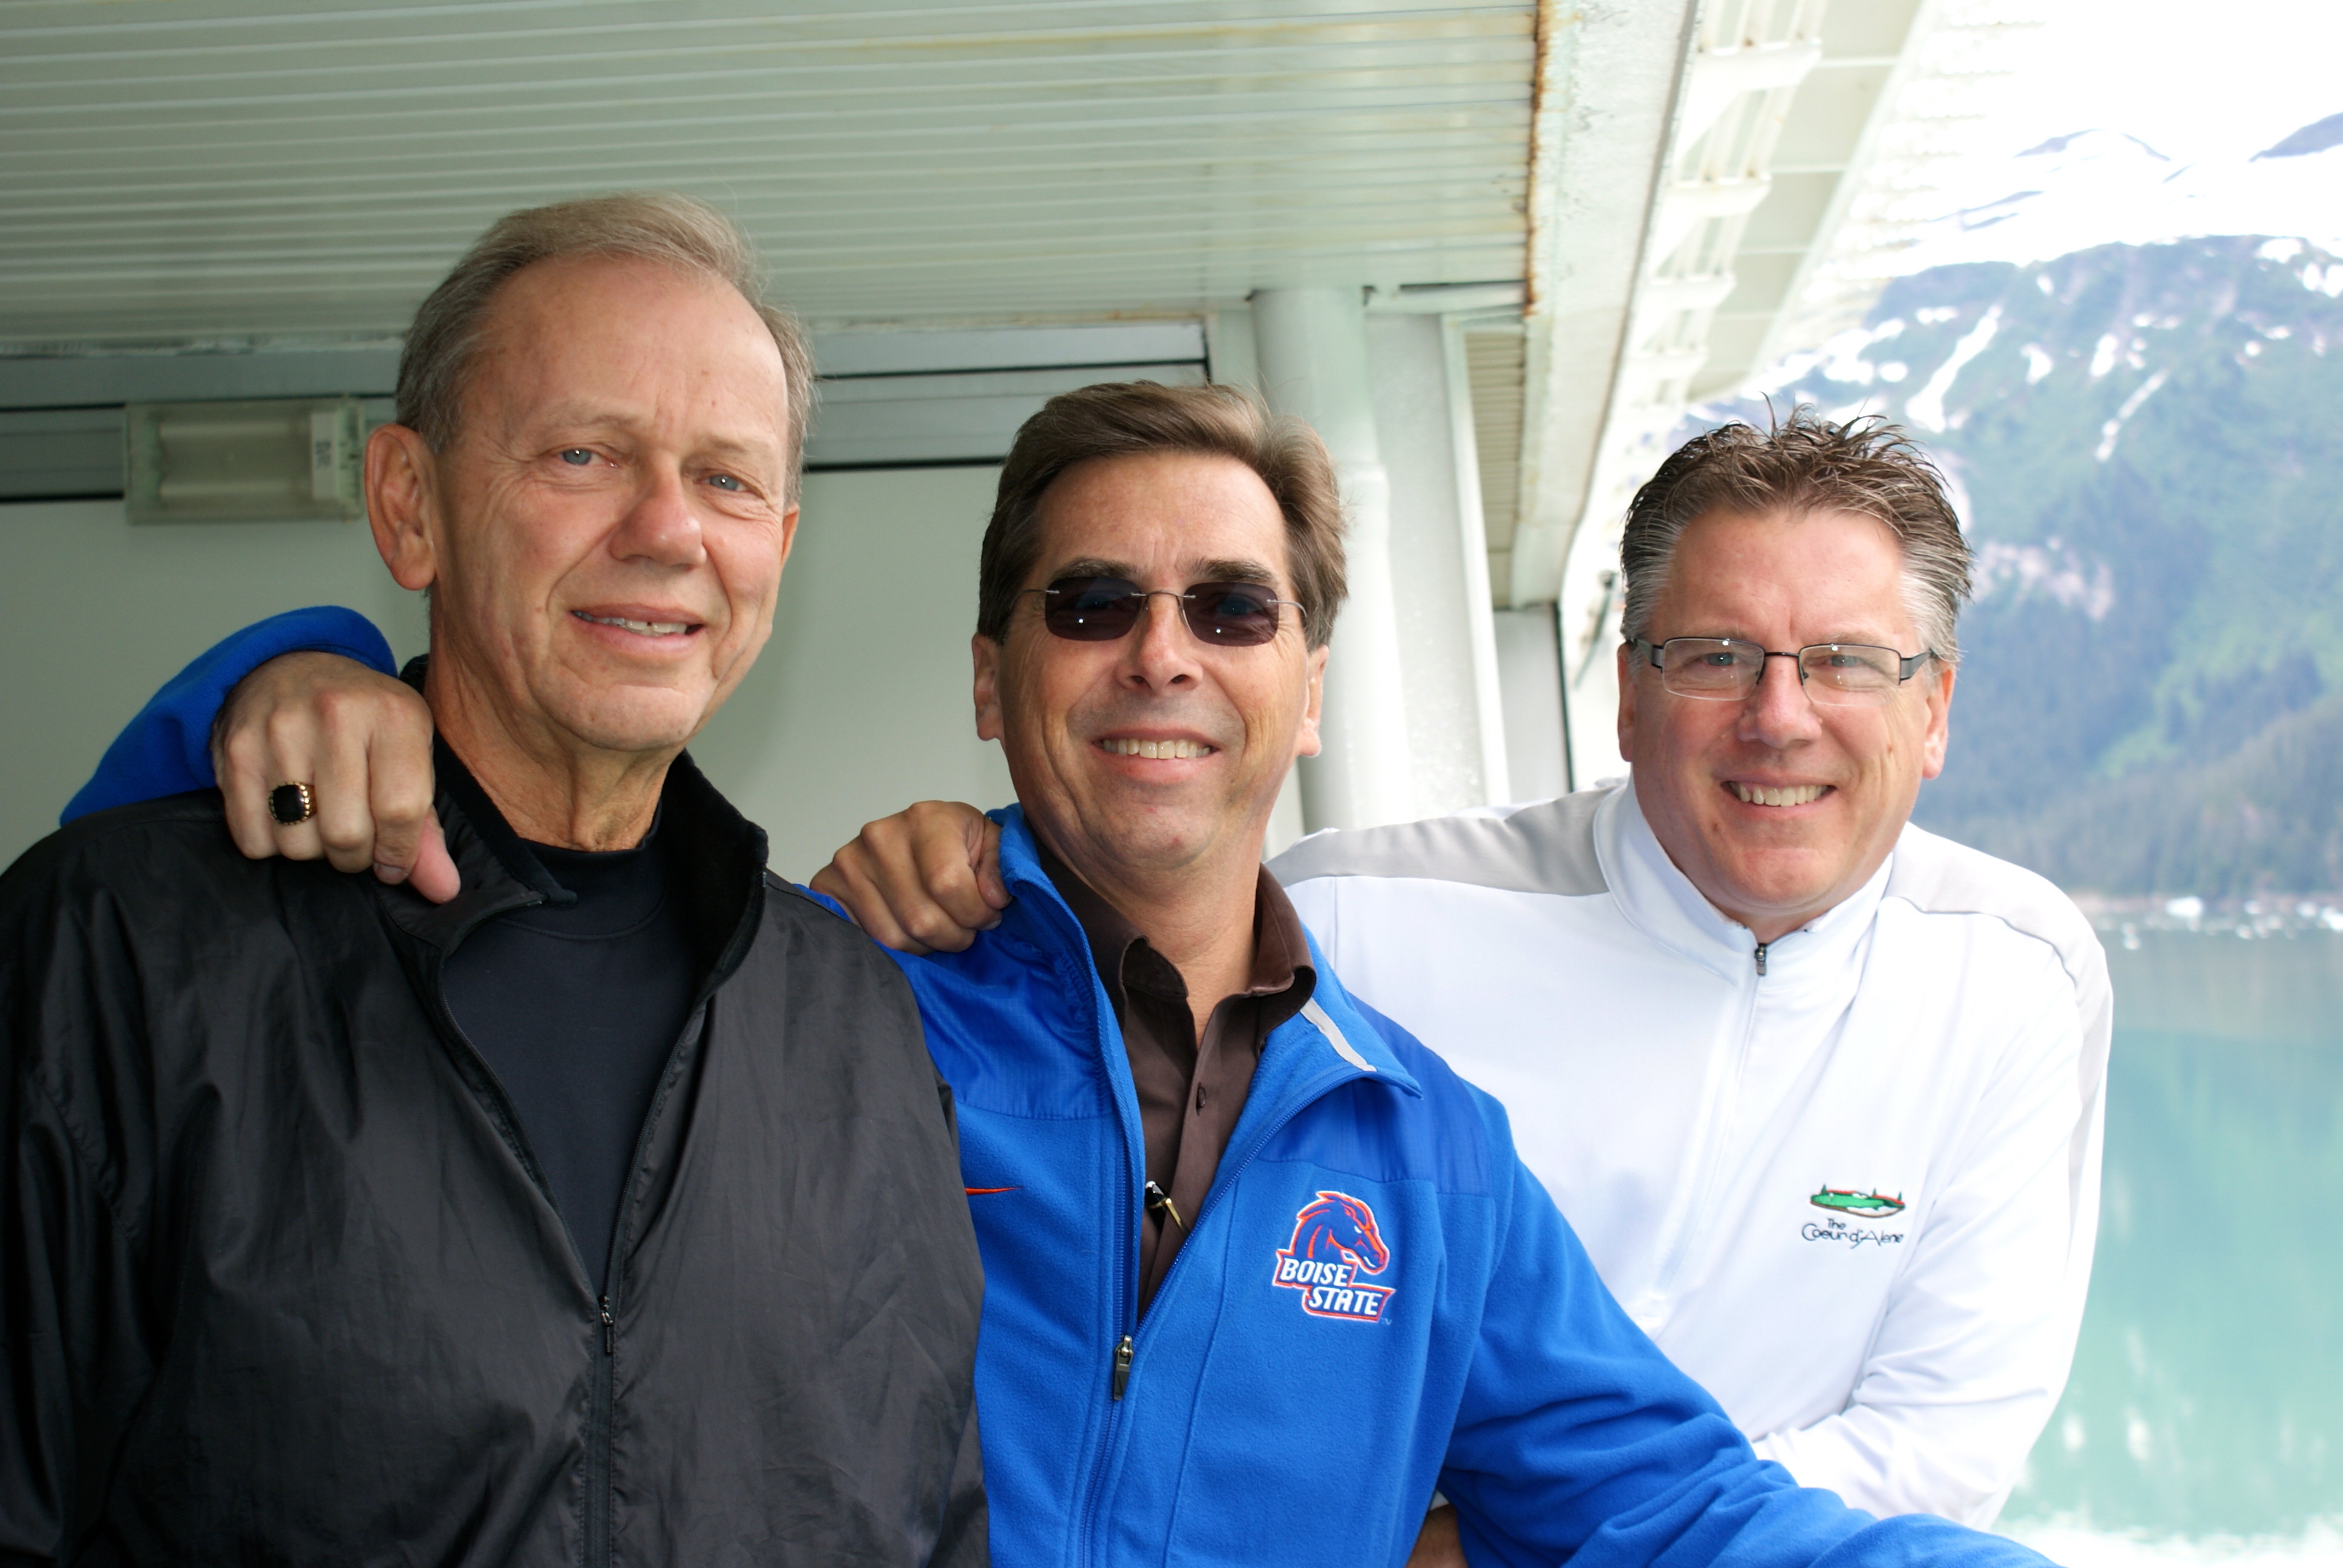 Charlie, center, takes a rare moment of pause on one of the many Alaska cruises he's led.